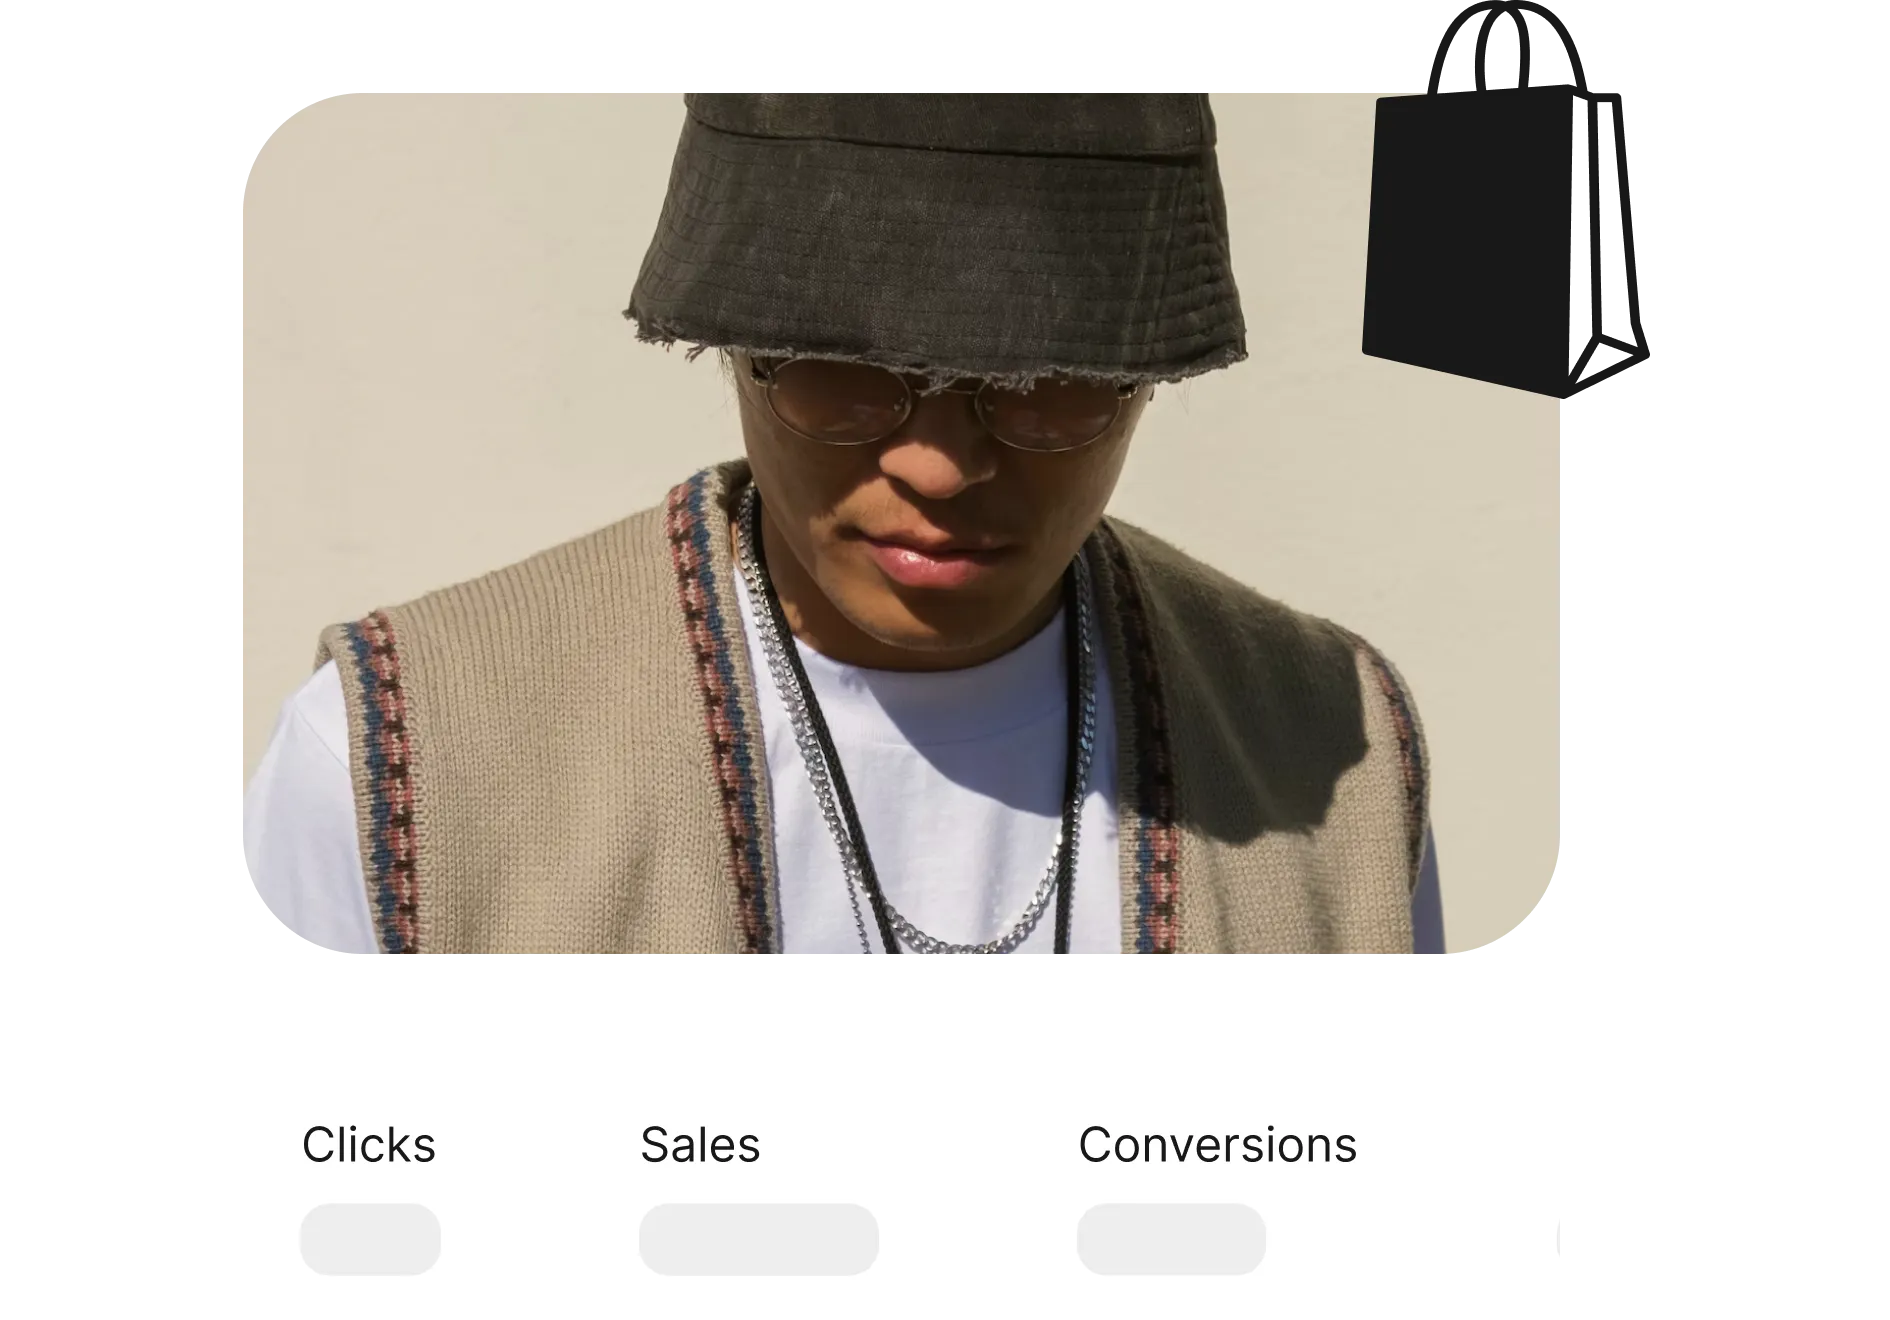 Picture of a men wearing a hat, with clicks, sales and convestions data at the bottom